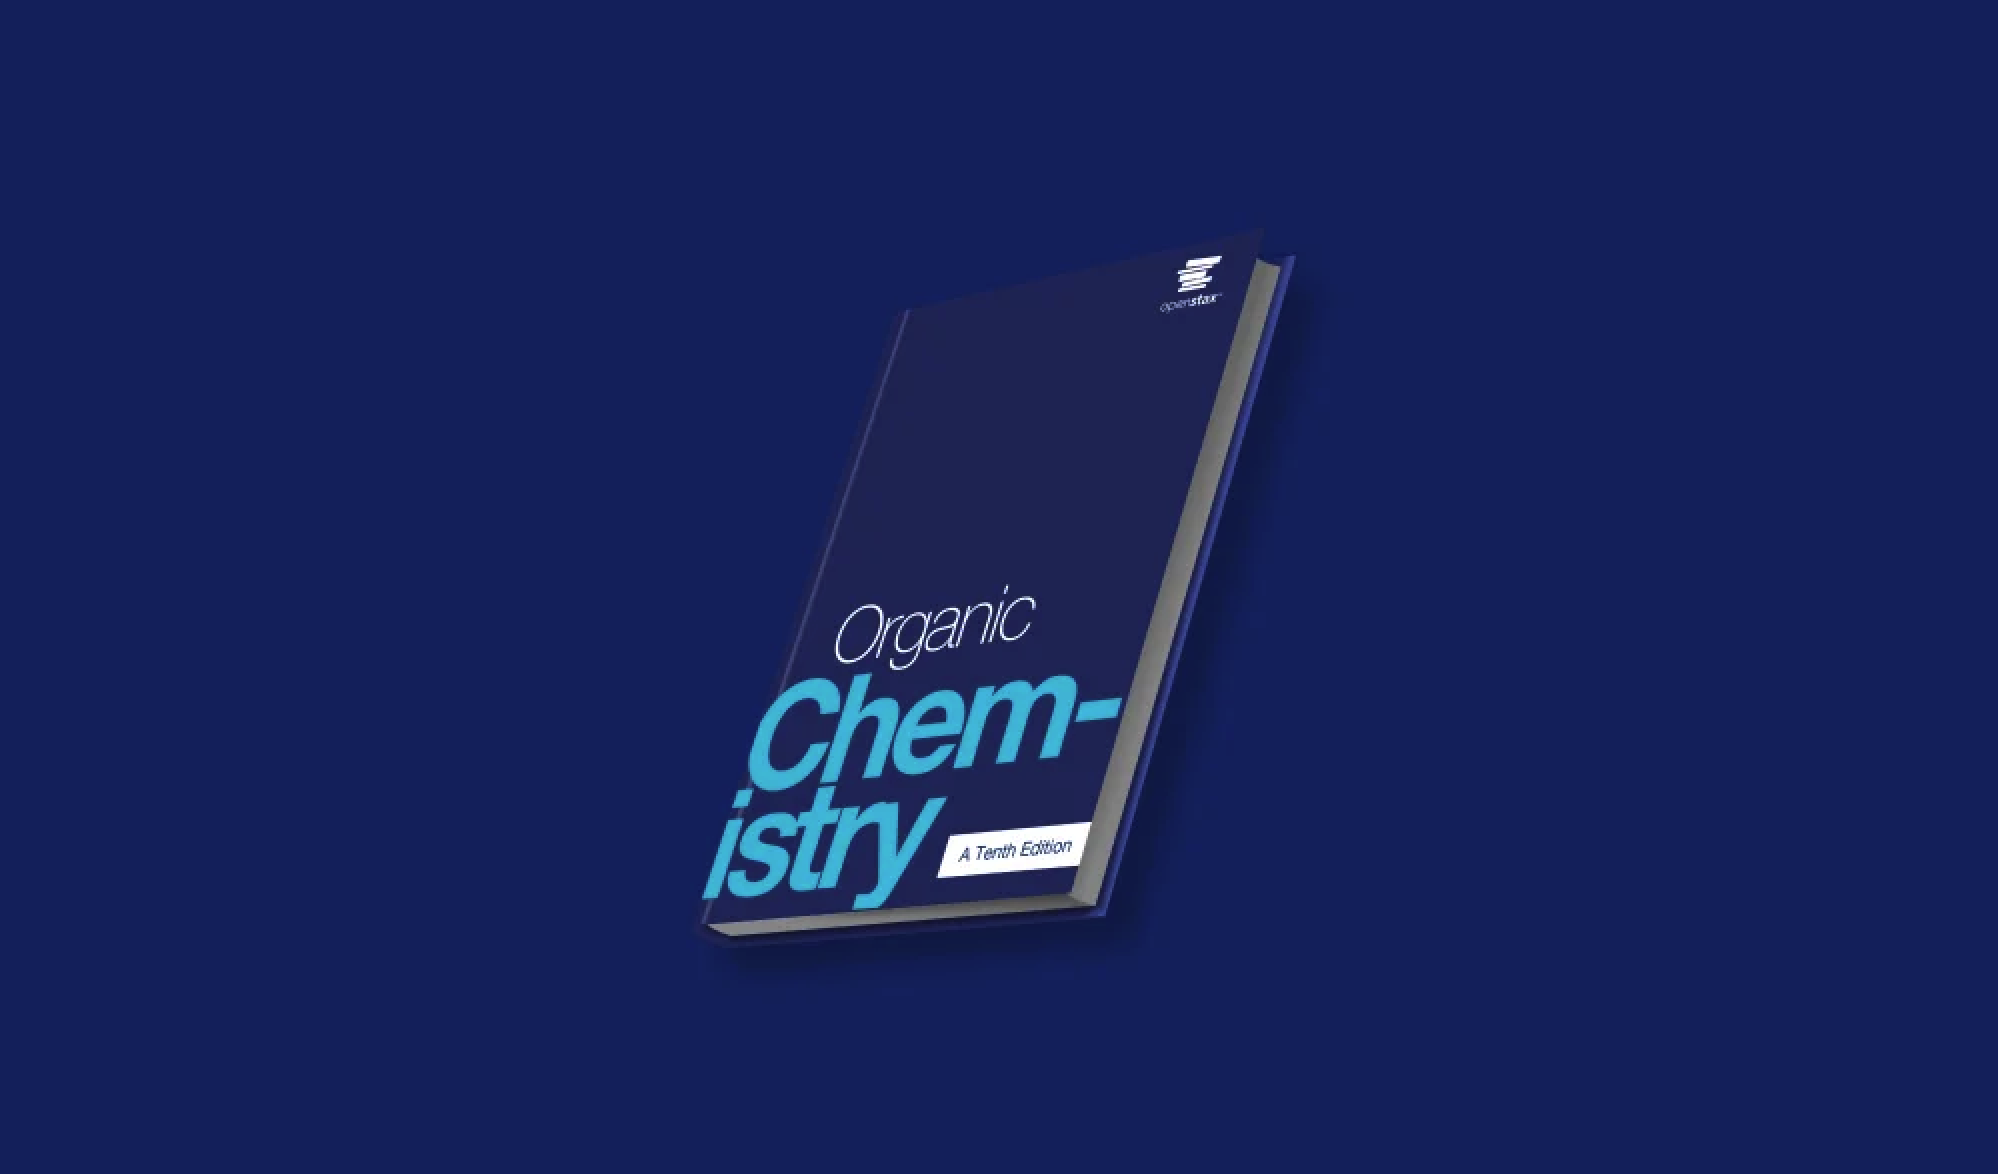 A 3D image of Organic Chemistry 10th Edition textbook